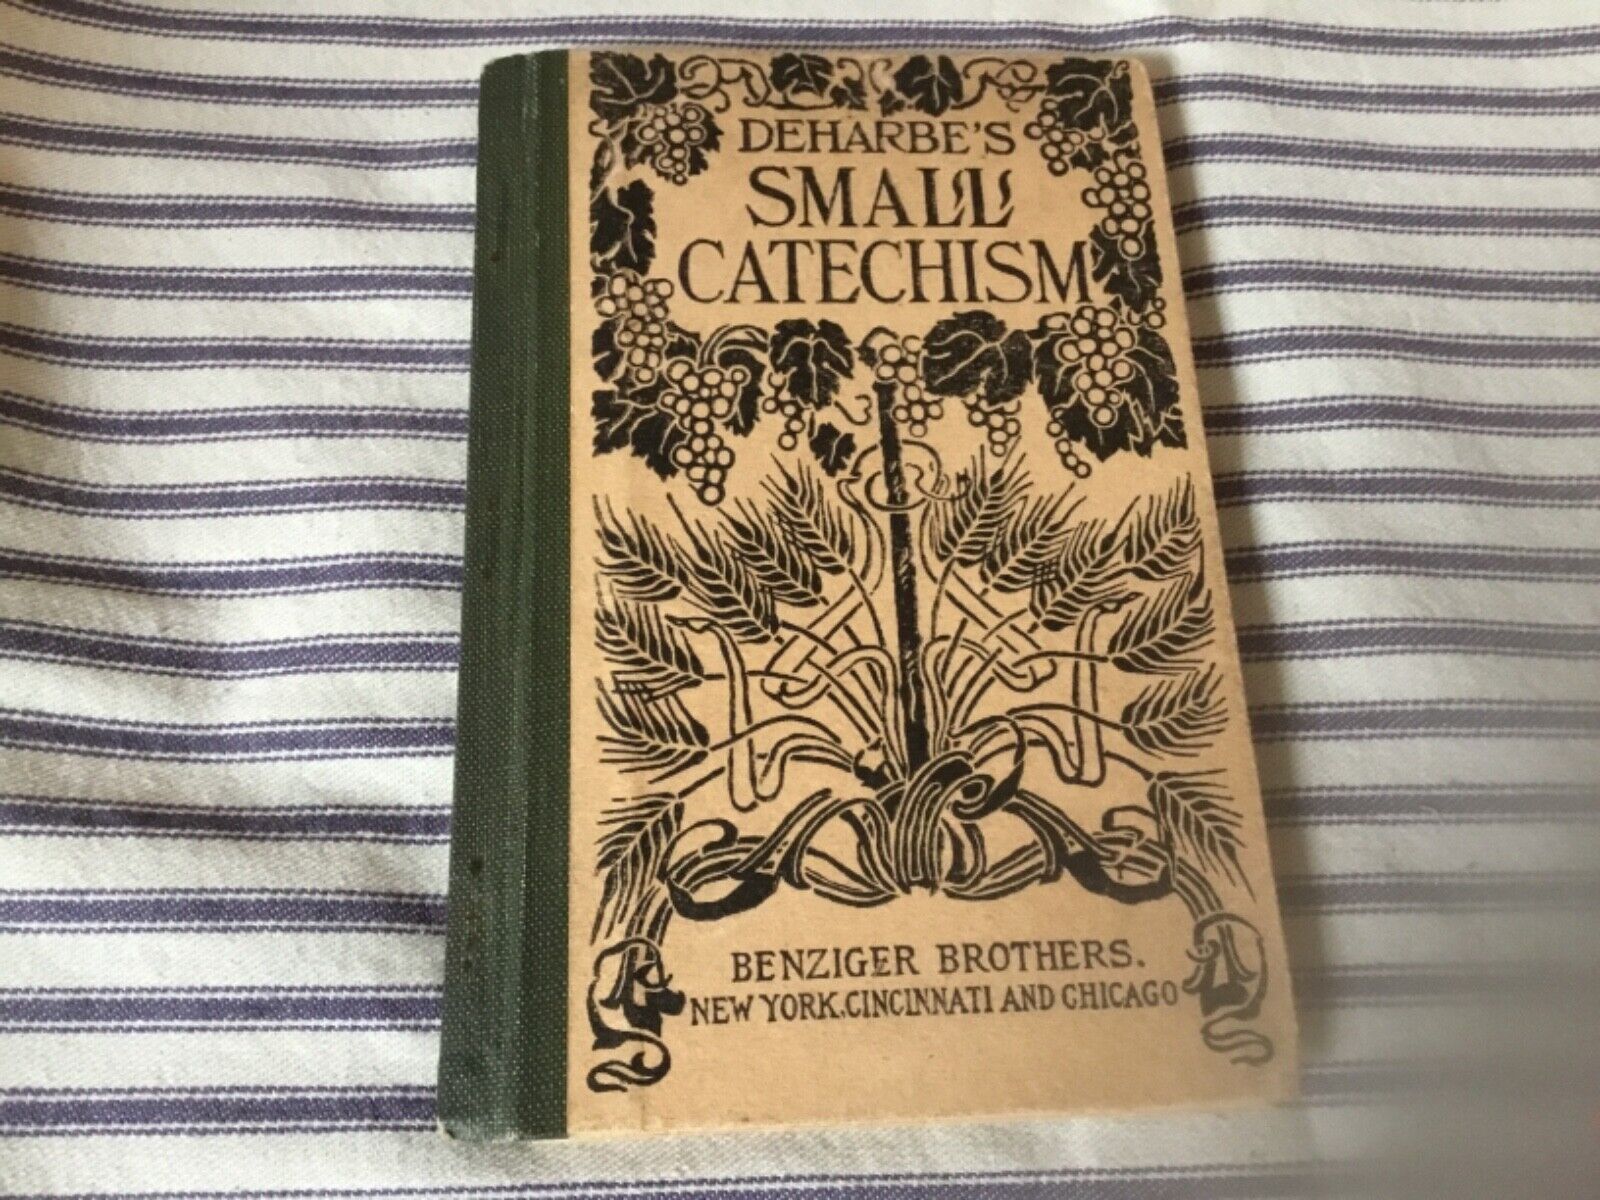 Antique 1921 Deharbe’s Small Catechism Translated from German Benziger Bros. 